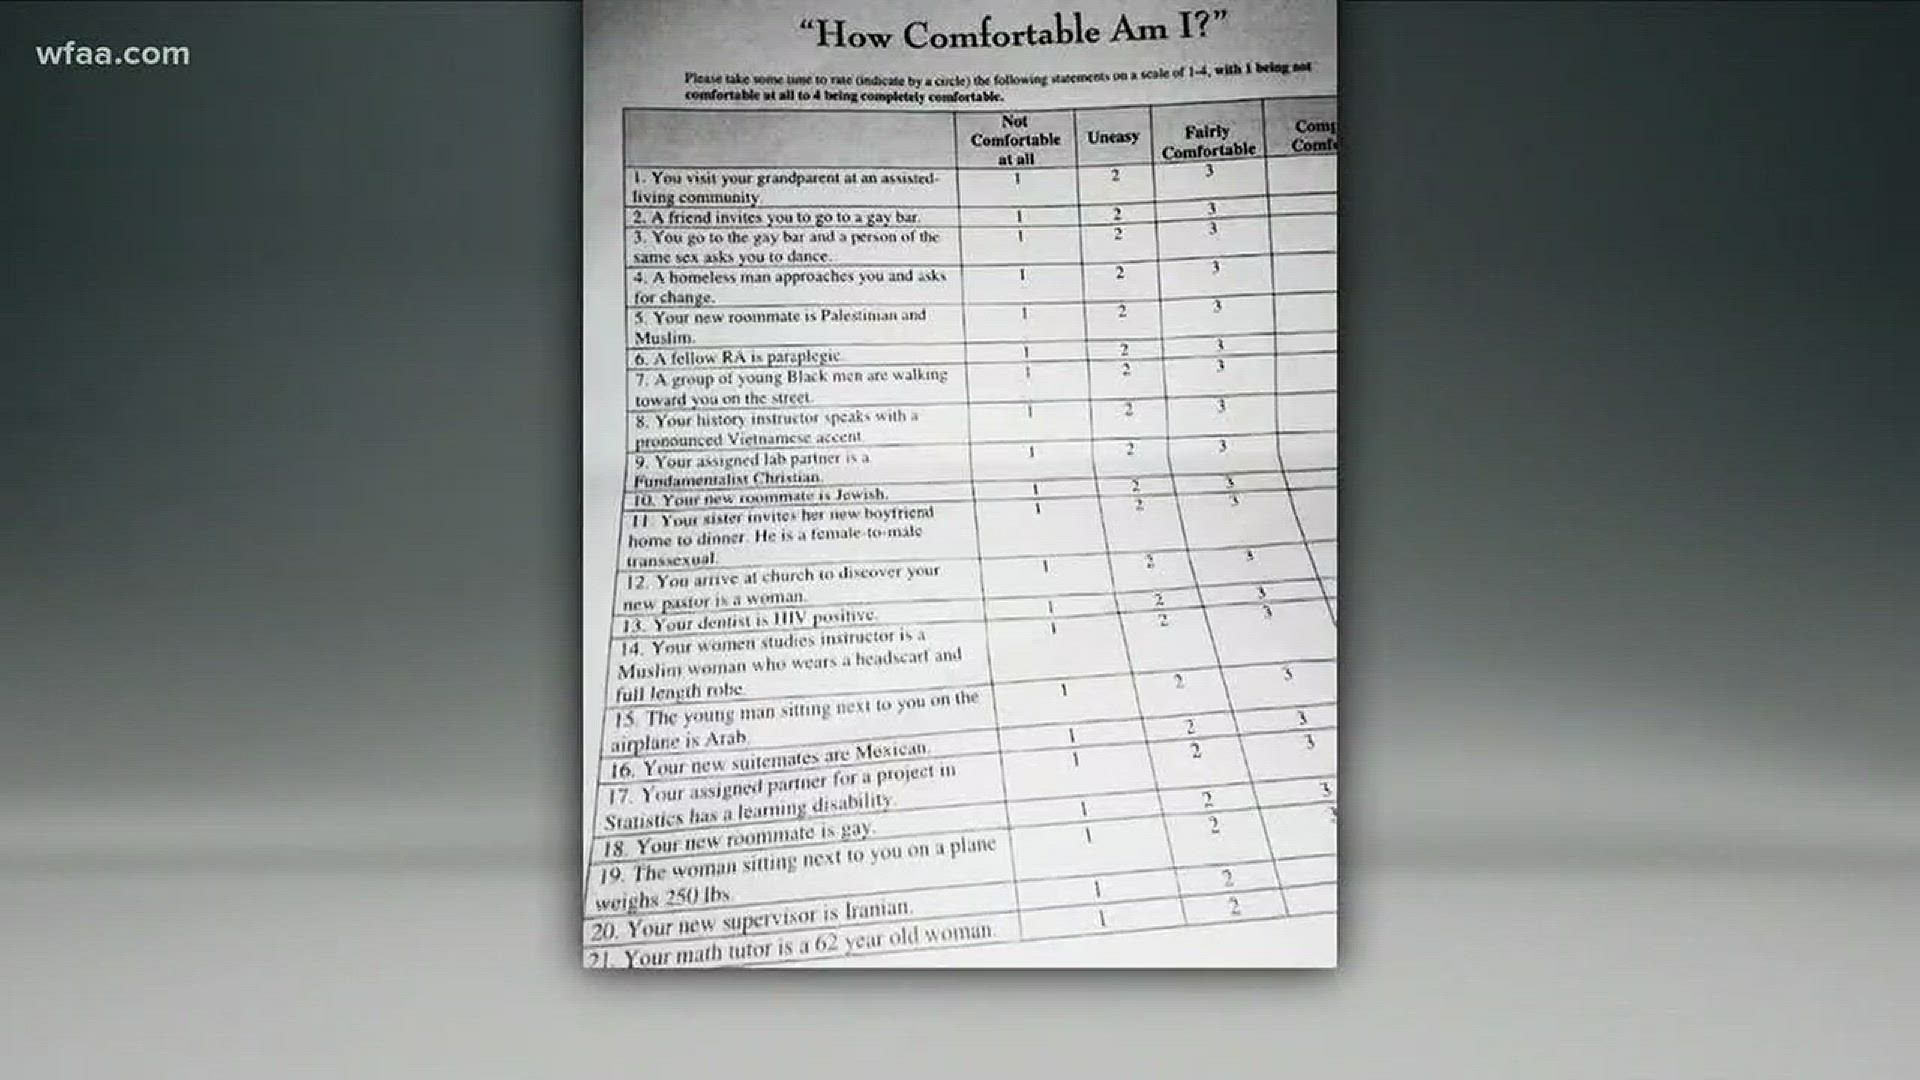 6th graders receive gay bar questionnaire at Birdville ISD campus wfaa pic